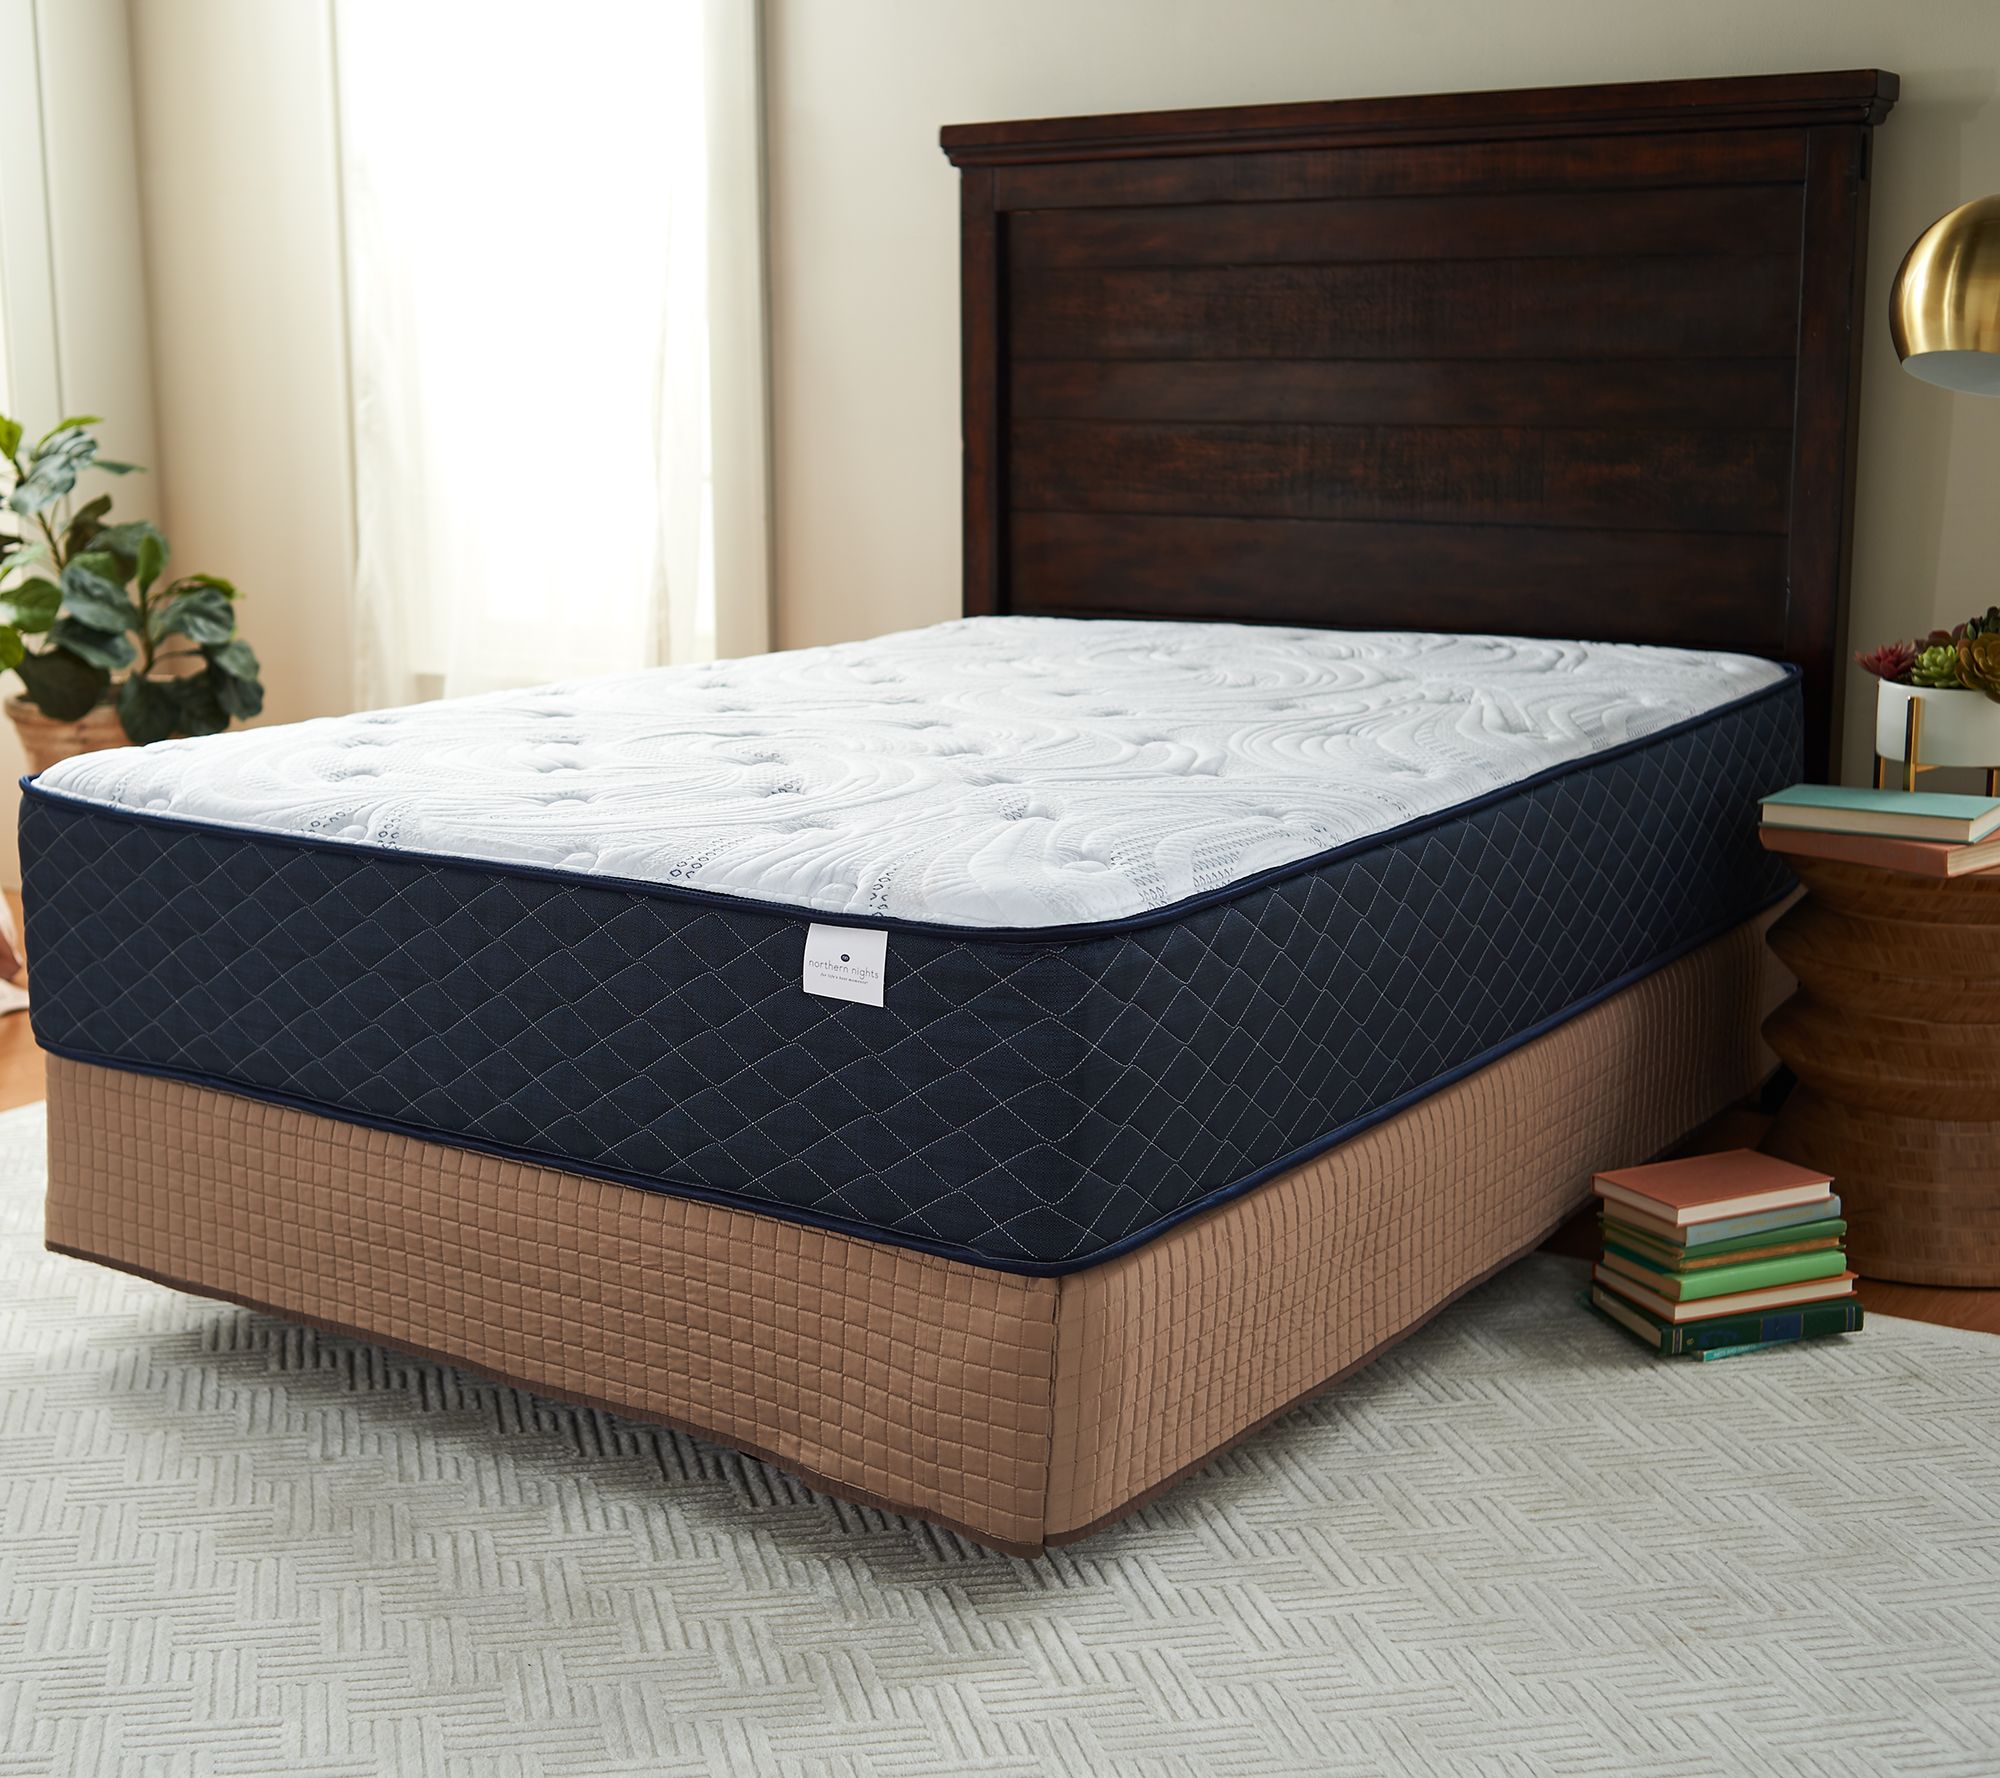 Beds Foam Mattress Home Kitchen Price Right Home Thomas